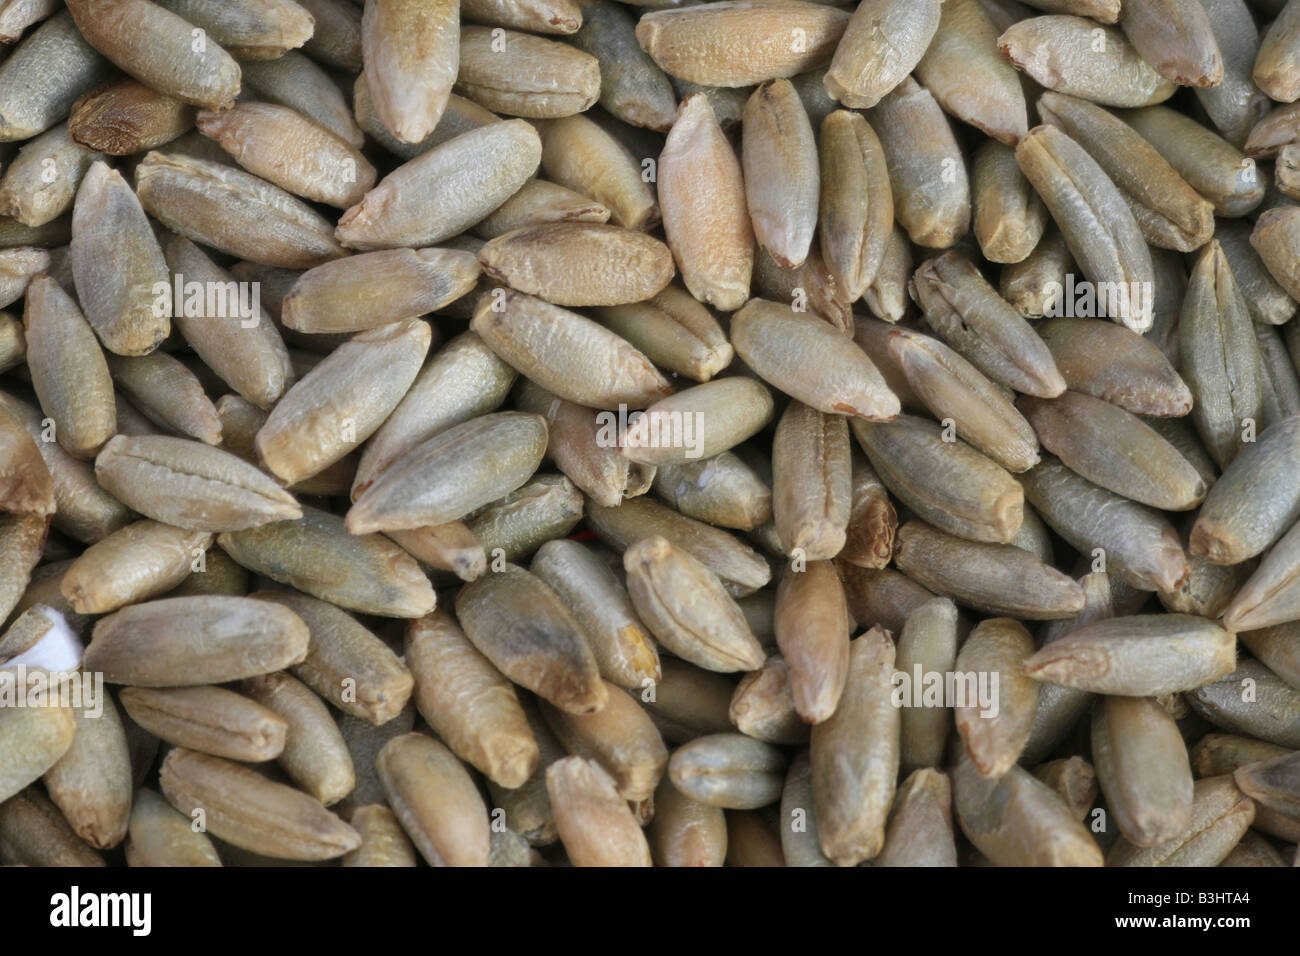 Secale cereale, cultivated rye Stock Photo